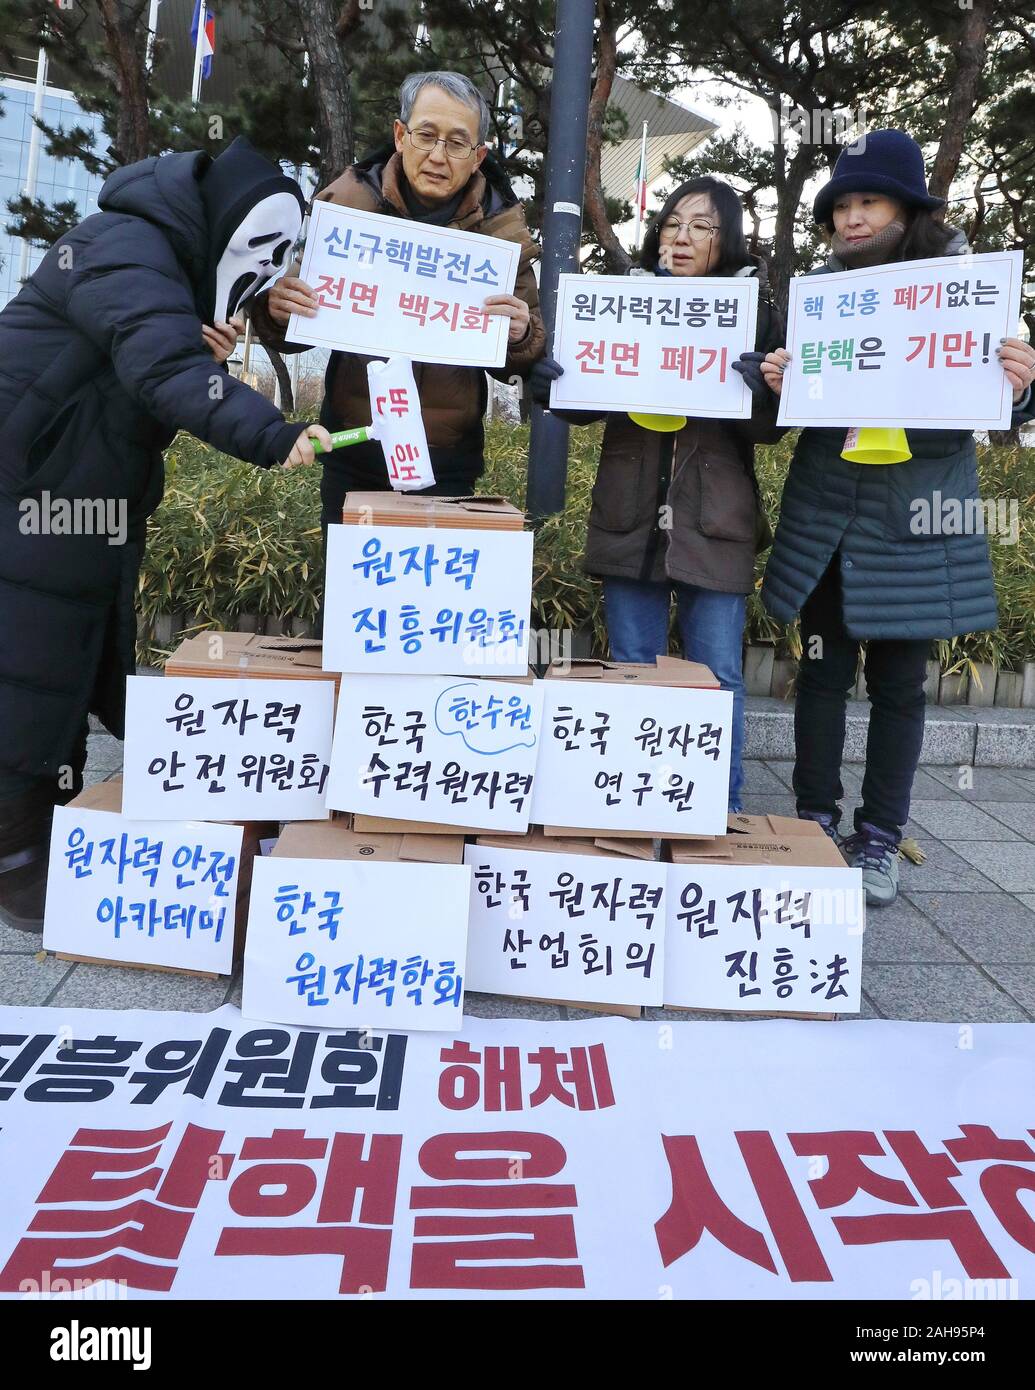 27th Dec, 2019. Anti-nuke protest Members of an anti-nuclear activist group take part in a protest in Seoul on Dec. 27, 2019, to voice their objection to nuclear power and call for the dissolution of the Atomic Energy Promotion Council. Credit: Yonhap/Newcom/Alamy Live News Stock Photo